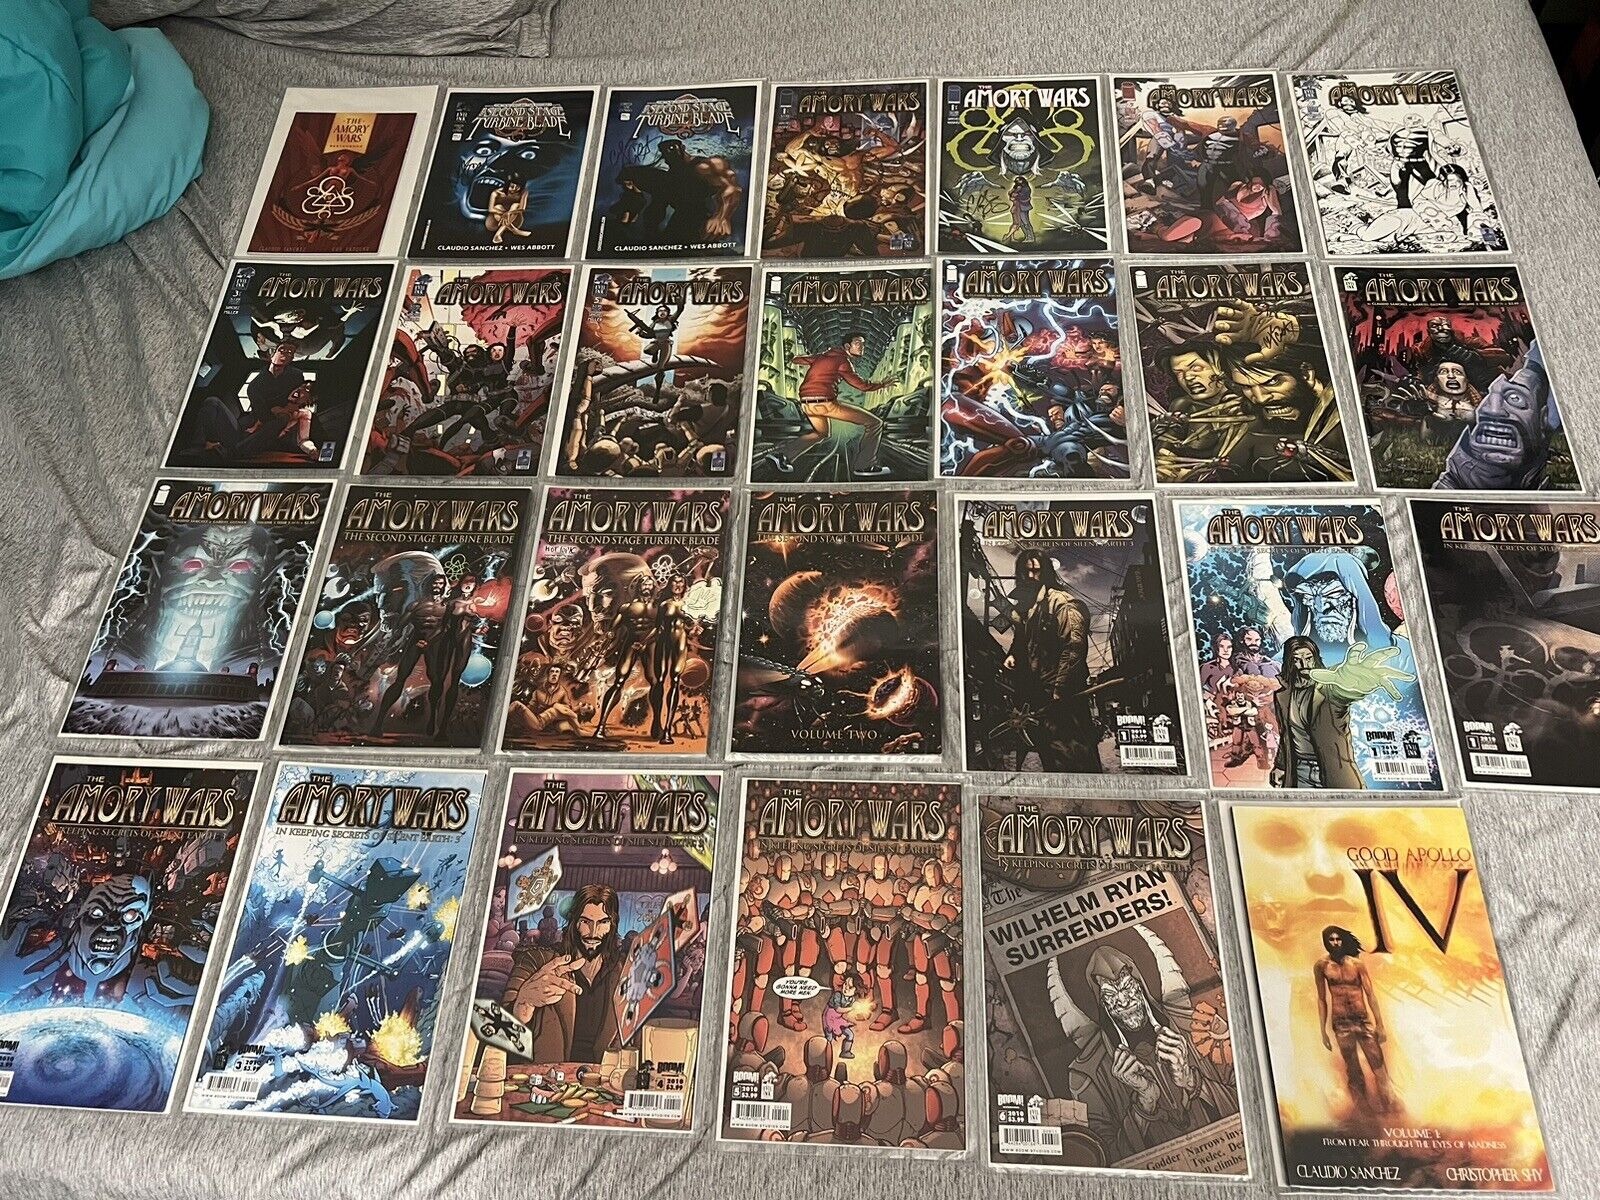 Massive Coheed Amory Wars Collection,with Signed Editions and Rare Variants